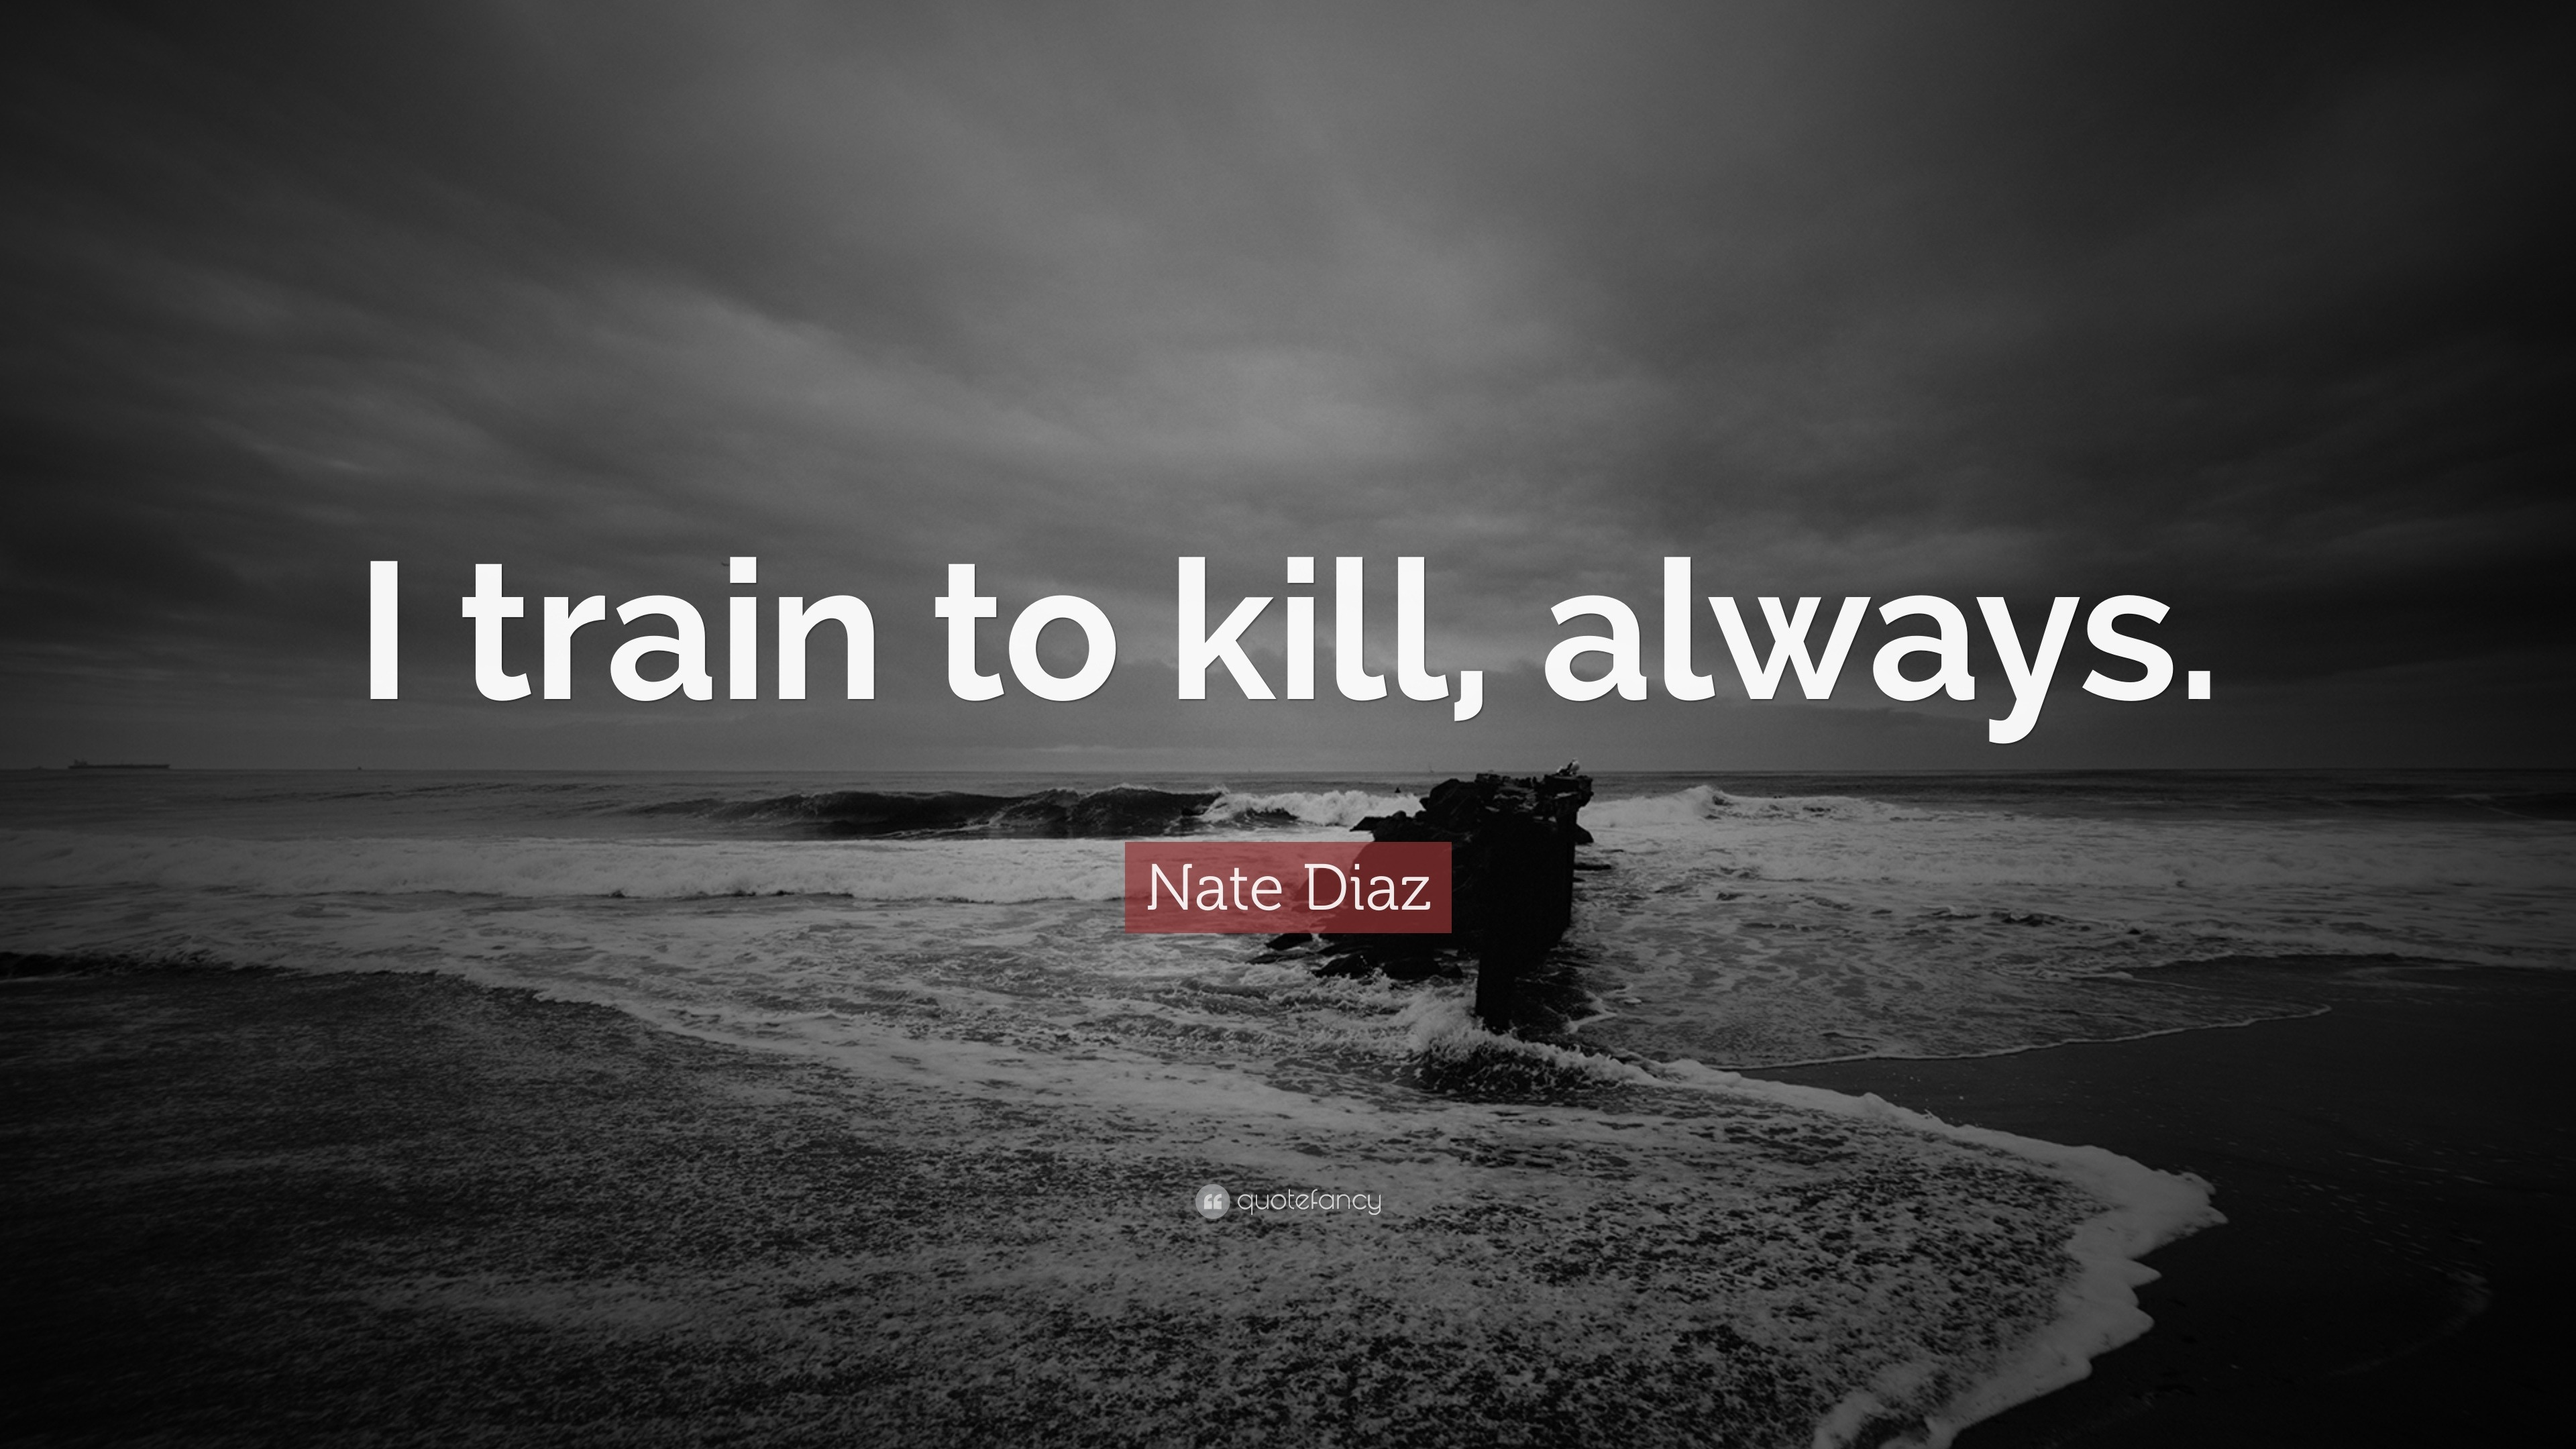 Nate Diaz Quotes (8 wallpapers) - Quotefancy